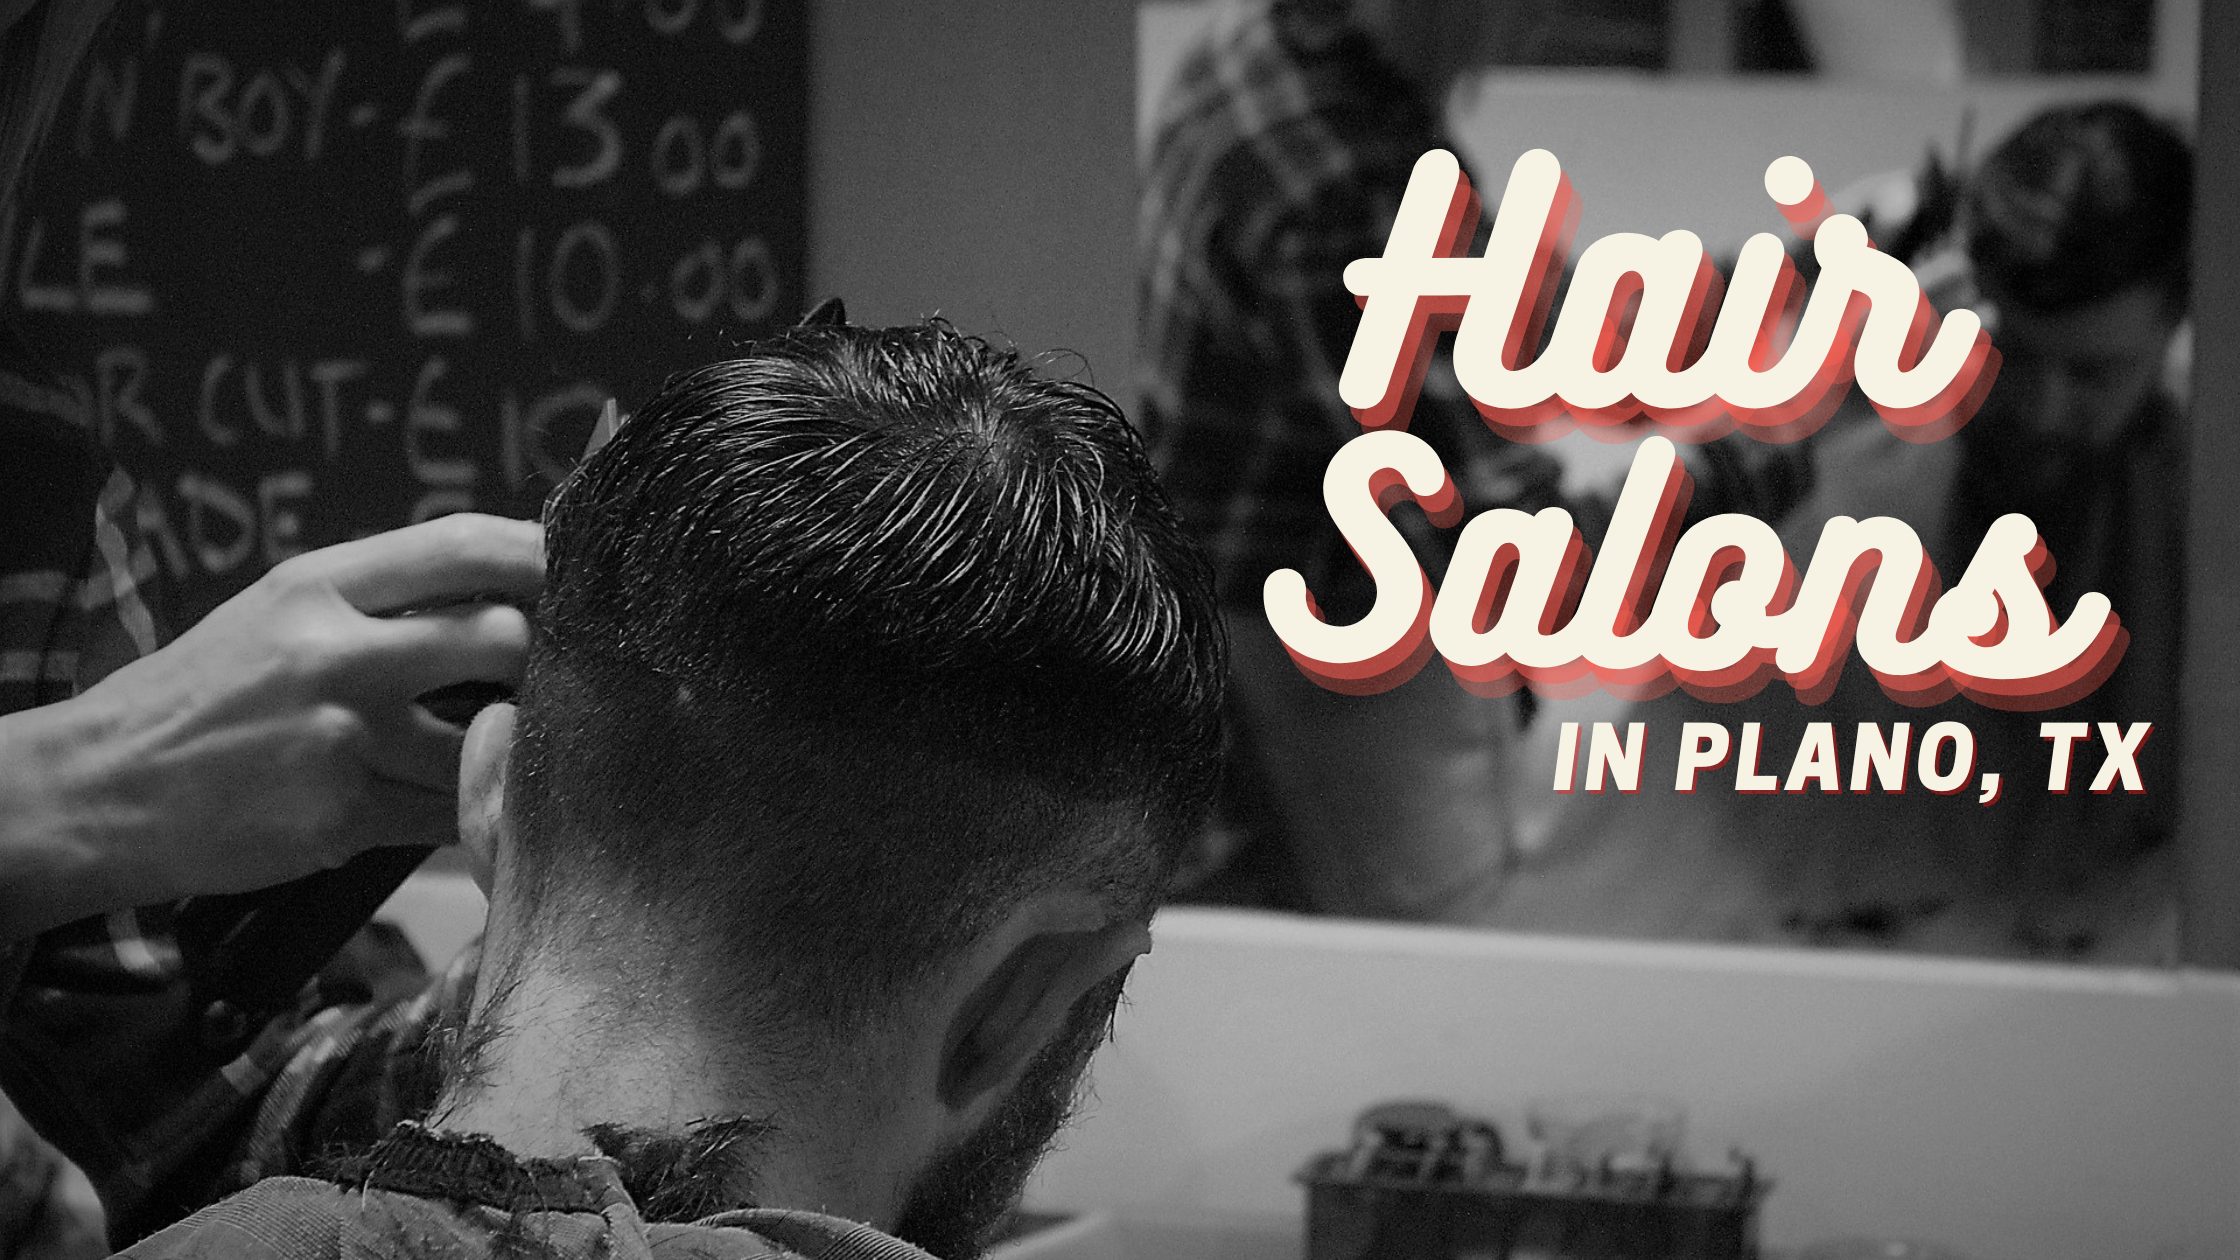 10 Best Hair Salons In Plano, Tx (Experienced & Trendy Options)